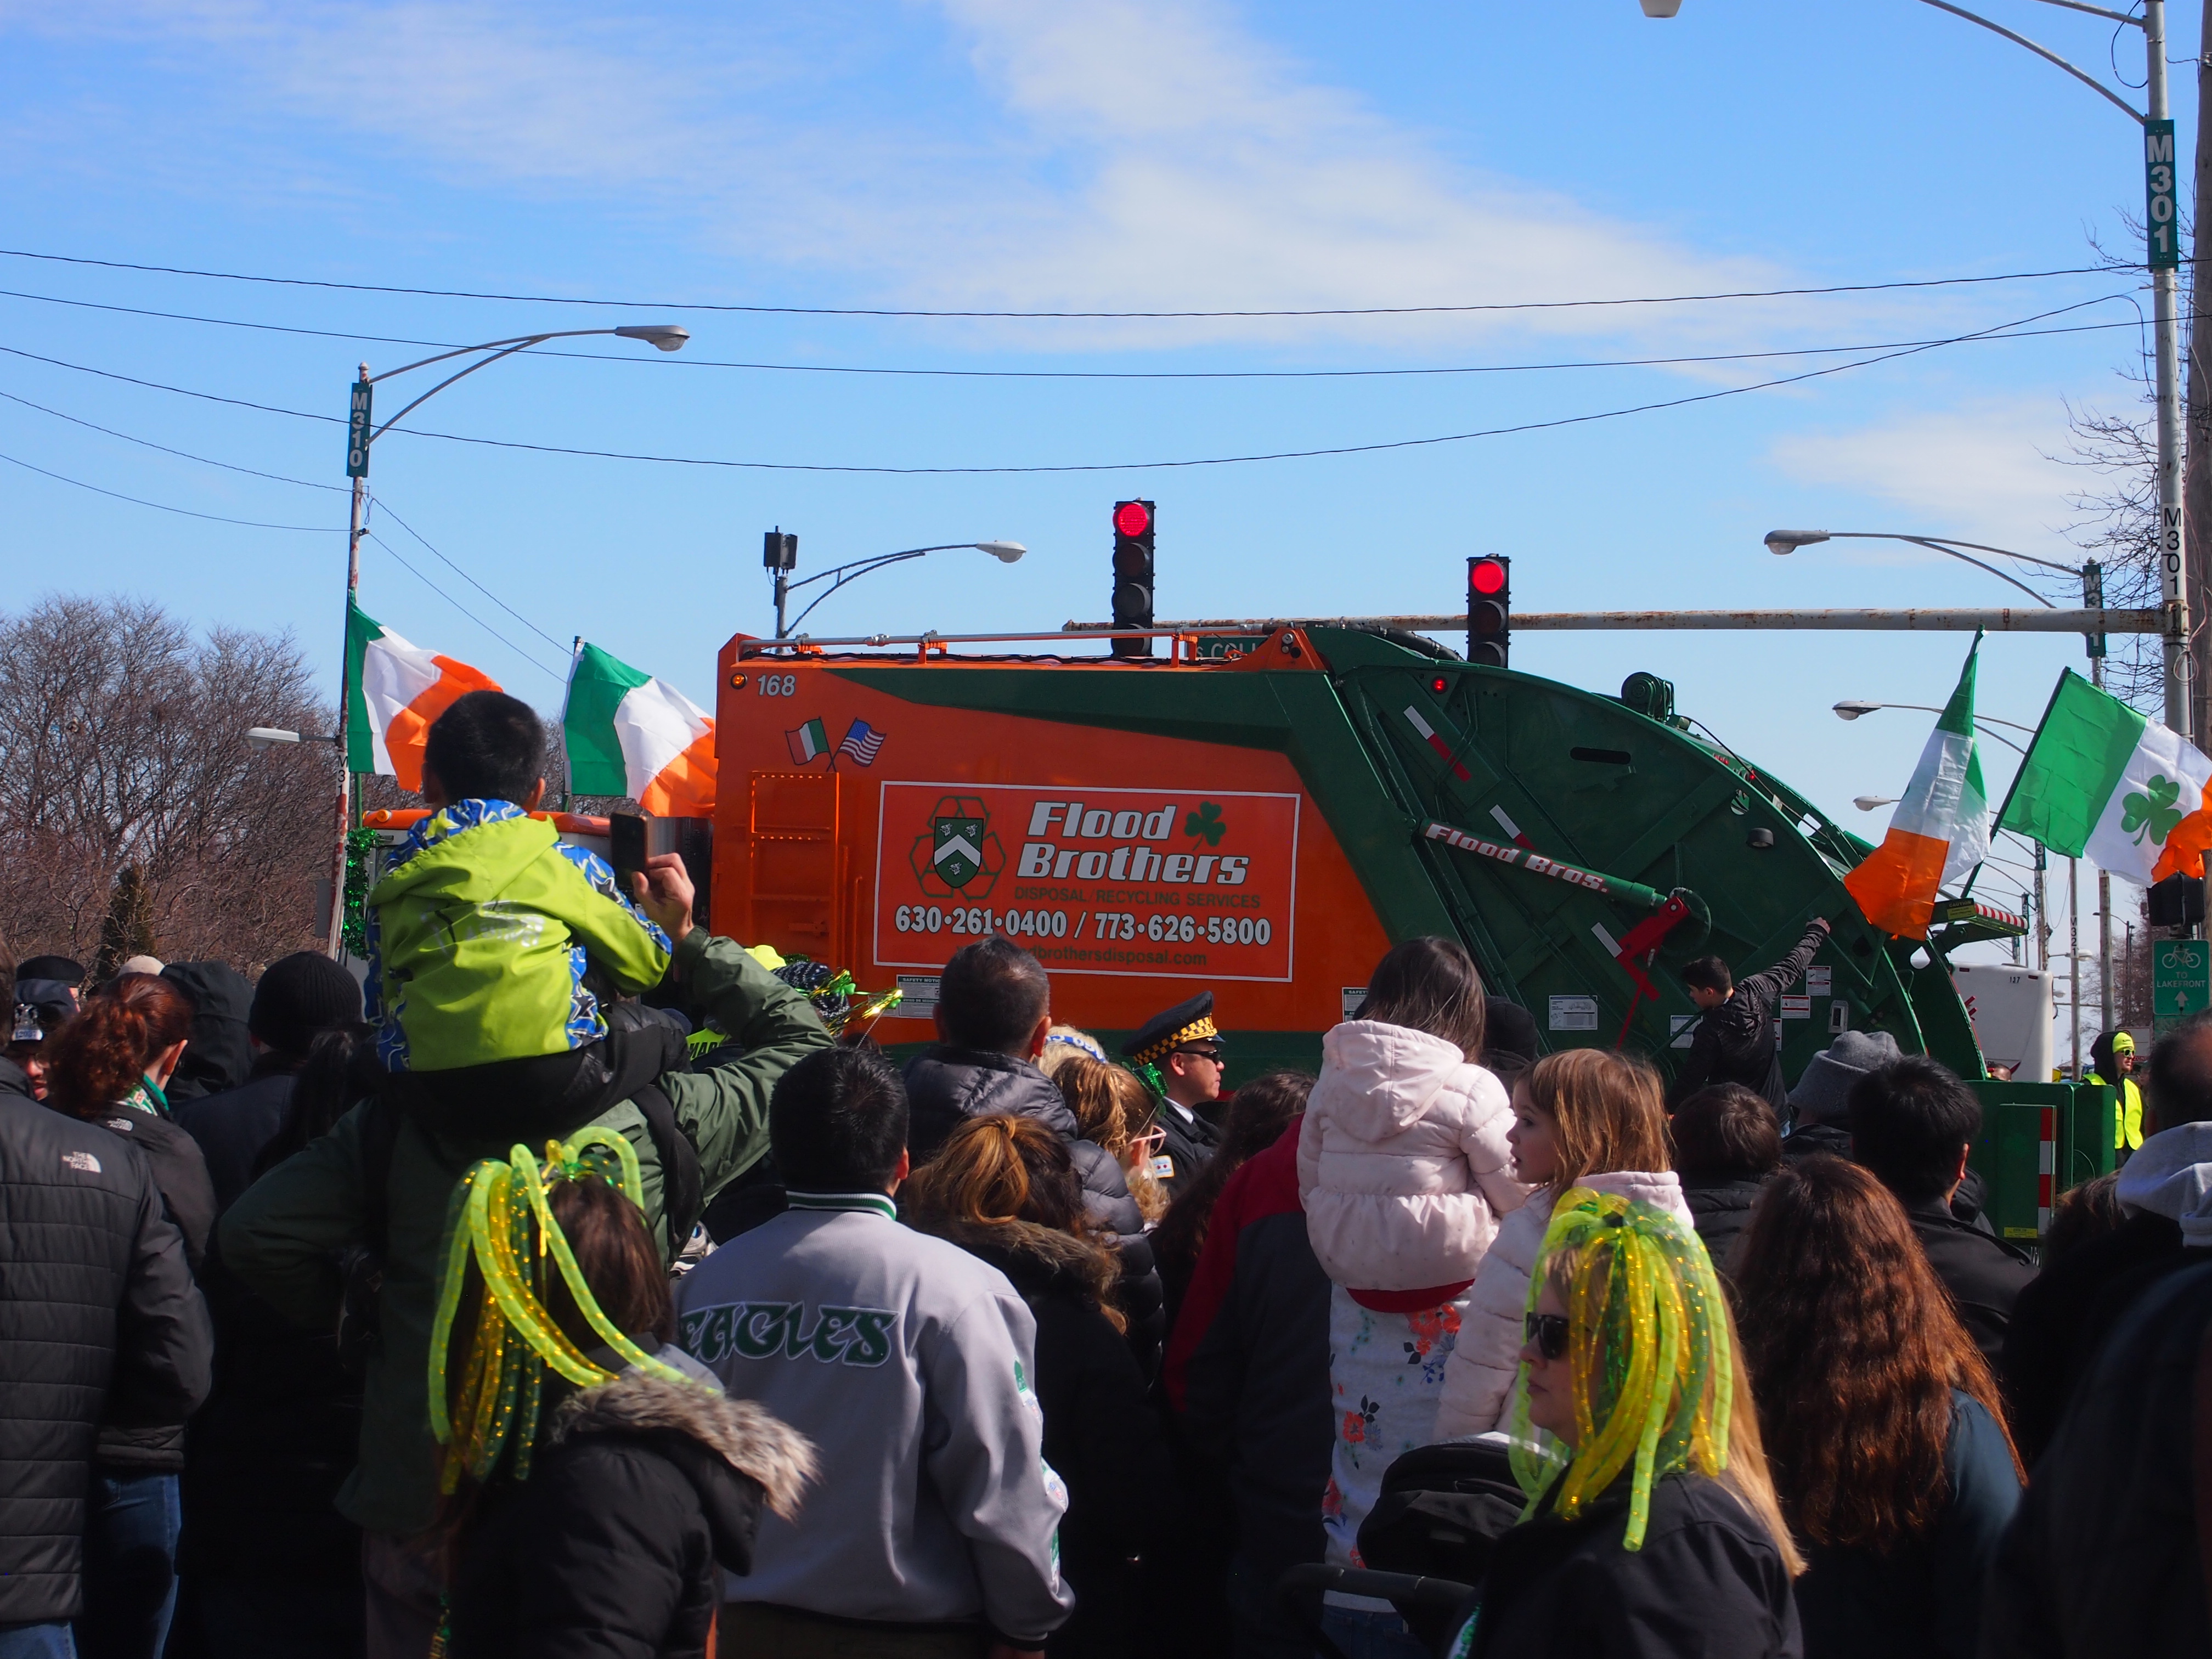 Downtown Chicago St. Patrick's Day Parade 2018